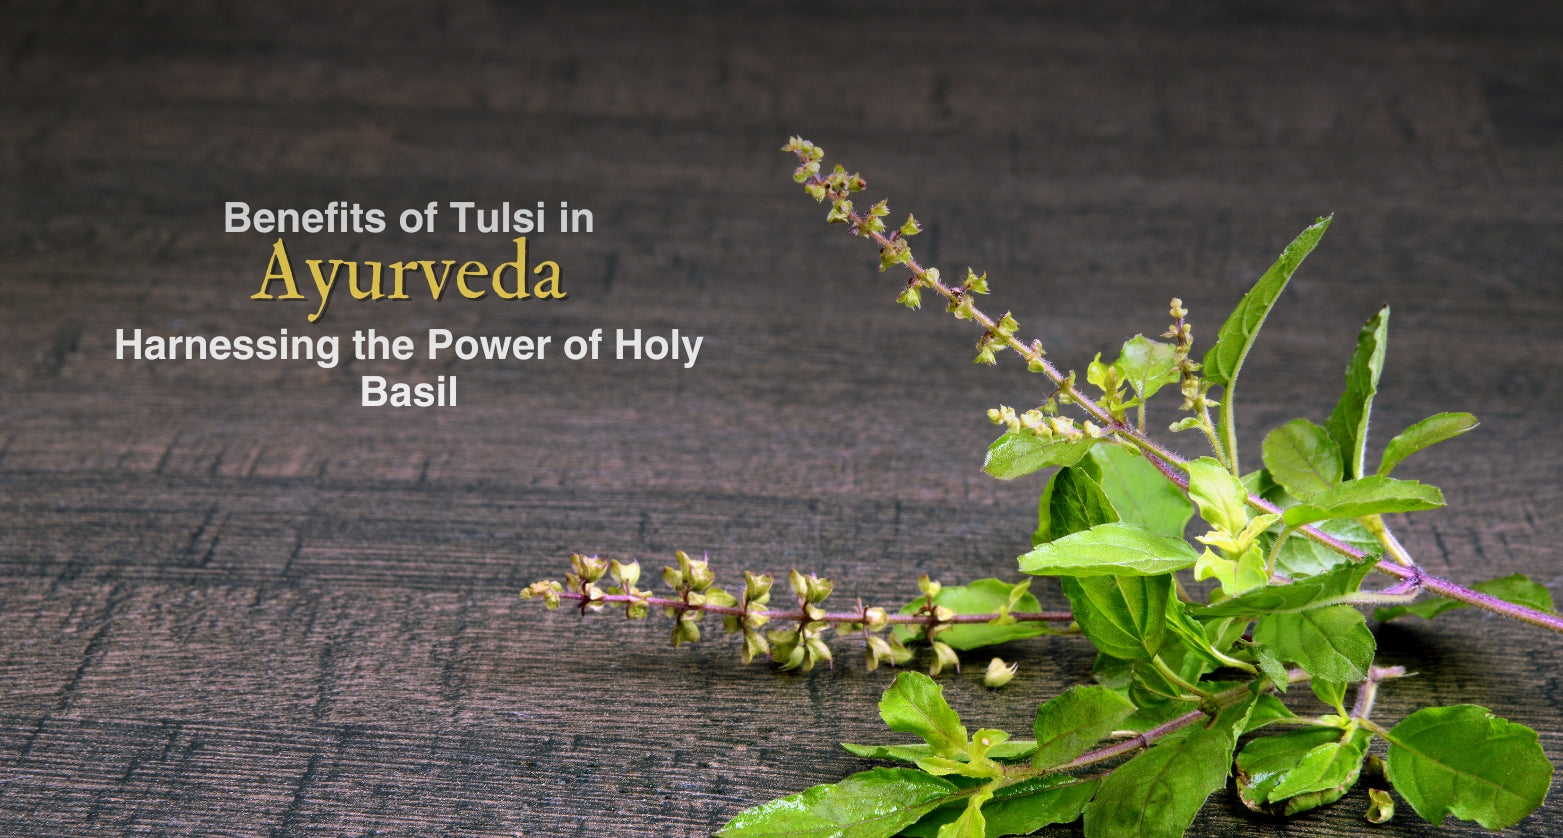 Benefits of Tulsi in Ayurveda: Harnessing the Power of Holy Basil